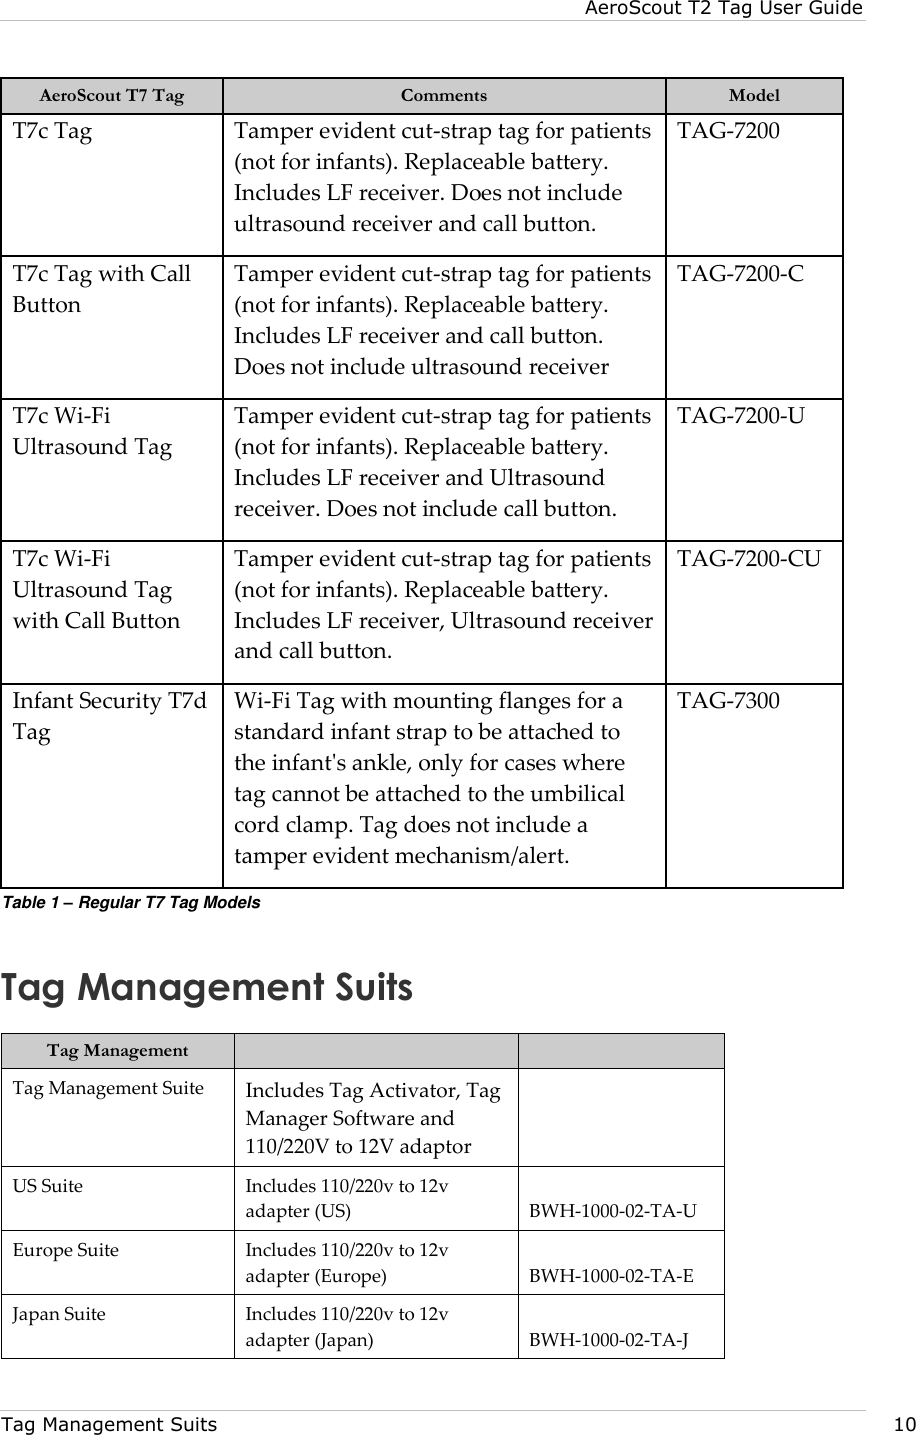 AeroScout T2 Tag User Guide  Tag Management Suits     10 AeroScout T7 Tag Comments Model T7c Tag Tamper evident cut-strap tag for patients (not for infants). Replaceable battery. Includes LF receiver. Does not include ultrasound receiver and call button. TAG-7200 T7c Tag with Call Button Tamper evident cut-strap tag for patients (not for infants). Replaceable battery. Includes LF receiver and call button. Does not include ultrasound receiver TAG-7200-C T7c Wi-Fi Ultrasound Tag Tamper evident cut-strap tag for patients (not for infants). Replaceable battery. Includes LF receiver and Ultrasound receiver. Does not include call button. TAG-7200-U T7c Wi-Fi Ultrasound Tag with Call Button Tamper evident cut-strap tag for patients (not for infants). Replaceable battery. Includes LF receiver, Ultrasound receiver and call button. TAG-7200-CU Infant Security T7d Tag Wi-Fi Tag with mounting flanges for a standard infant strap to be attached to the infant&apos;s ankle, only for cases where tag cannot be attached to the umbilical cord clamp. Tag does not include a tamper evident mechanism/alert.  TAG-7300 Table 1 – Regular T7 Tag Models Tag Management Suits Tag Management   Tag Management Suite Includes Tag Activator, Tag Manager Software and 110/220V to 12V adaptor  US Suite Includes 110/220v to 12v adapter (US) BWH-1000-02-TA-U Europe Suite Includes 110/220v to 12v adapter (Europe) BWH-1000-02-TA-E Japan Suite Includes 110/220v to 12v adapter (Japan) BWH-1000-02-TA-J  